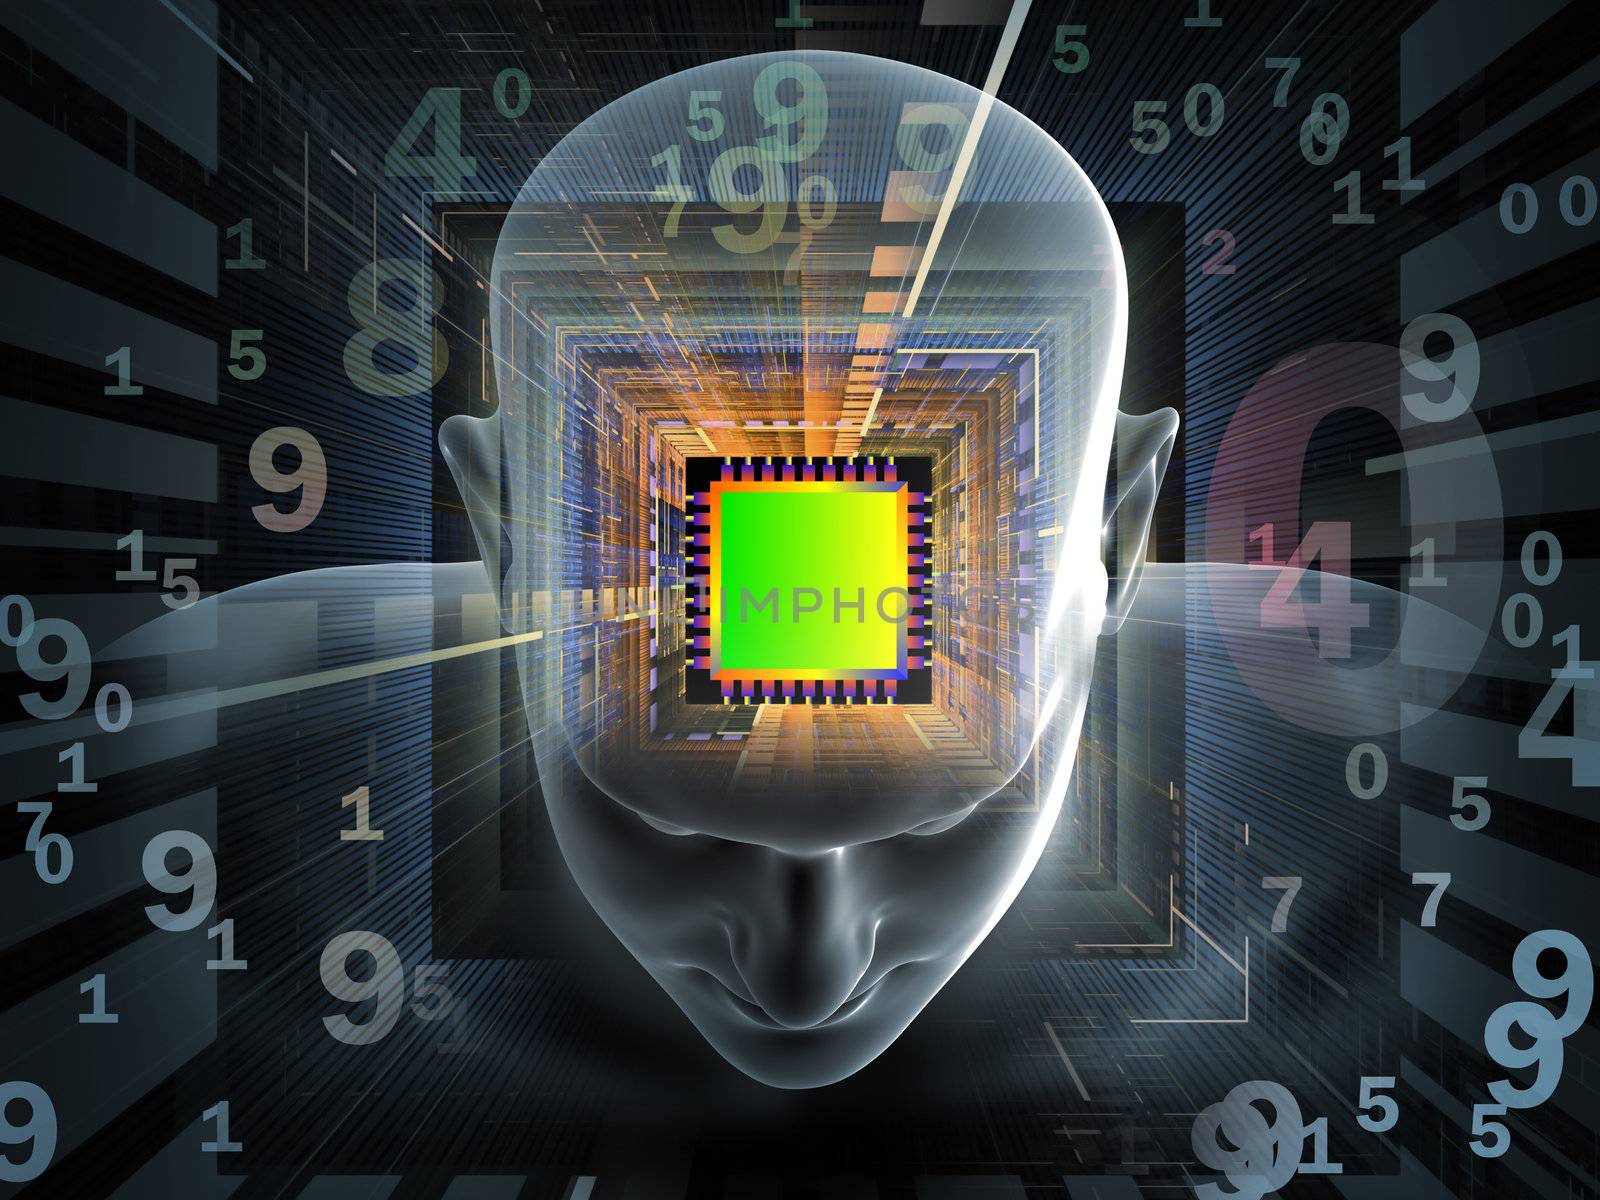 Collage of human head, computer chip, digits and various abstract elements on the subject of intelligence, science, technology, human and artificial mind